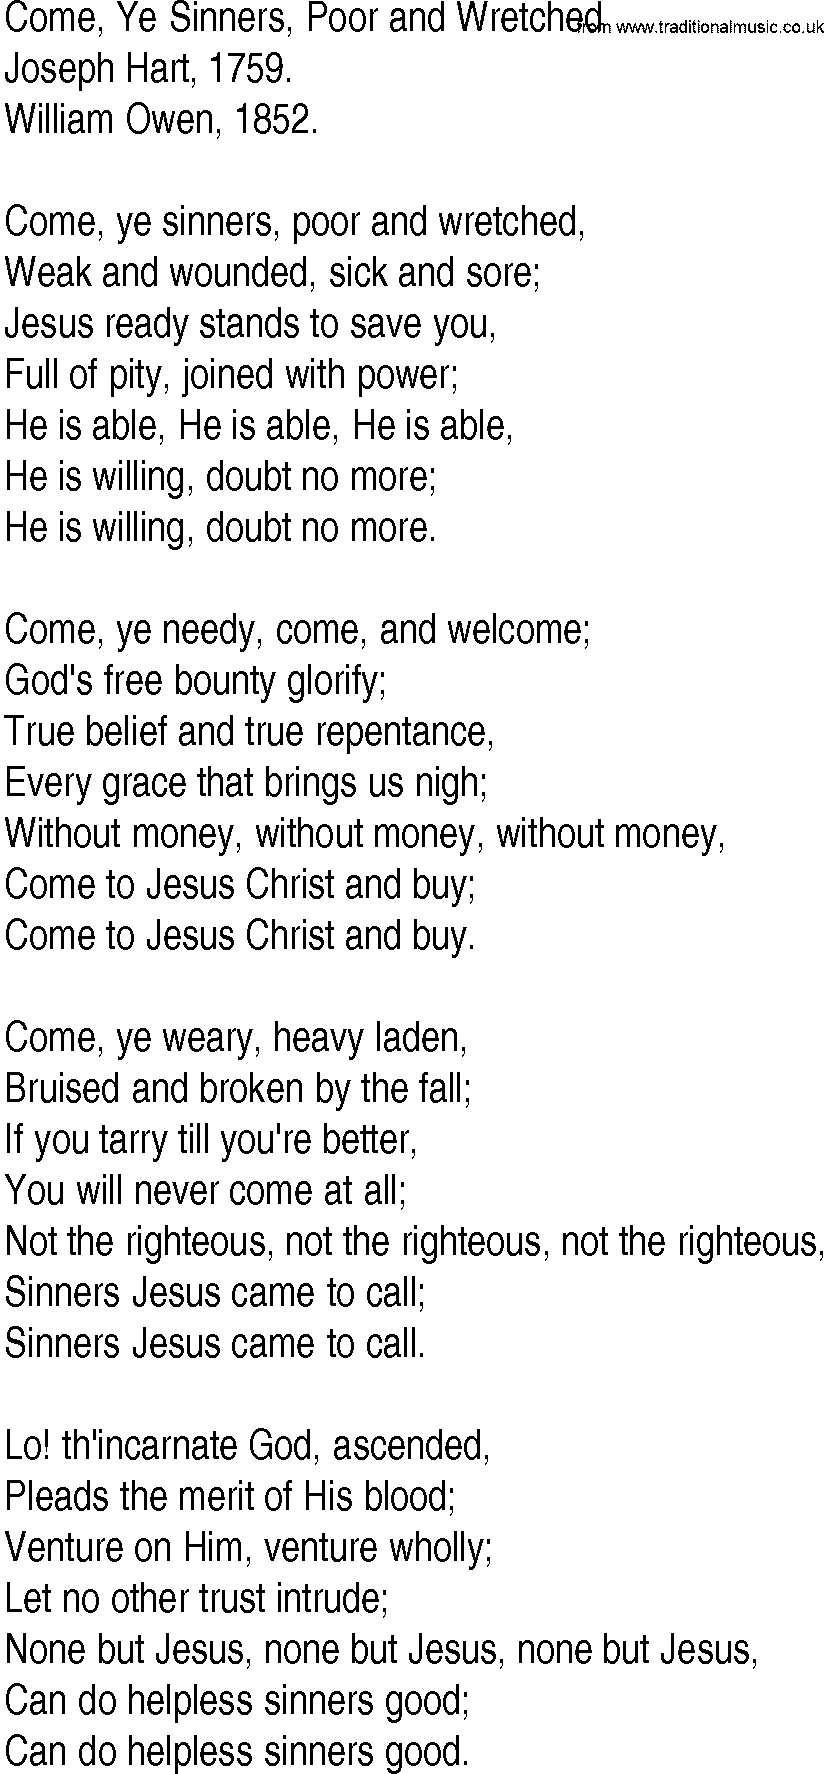 Hymn and Gospel Song: Come, Ye Sinners, Poor and Wretched by Joseph Hart lyrics